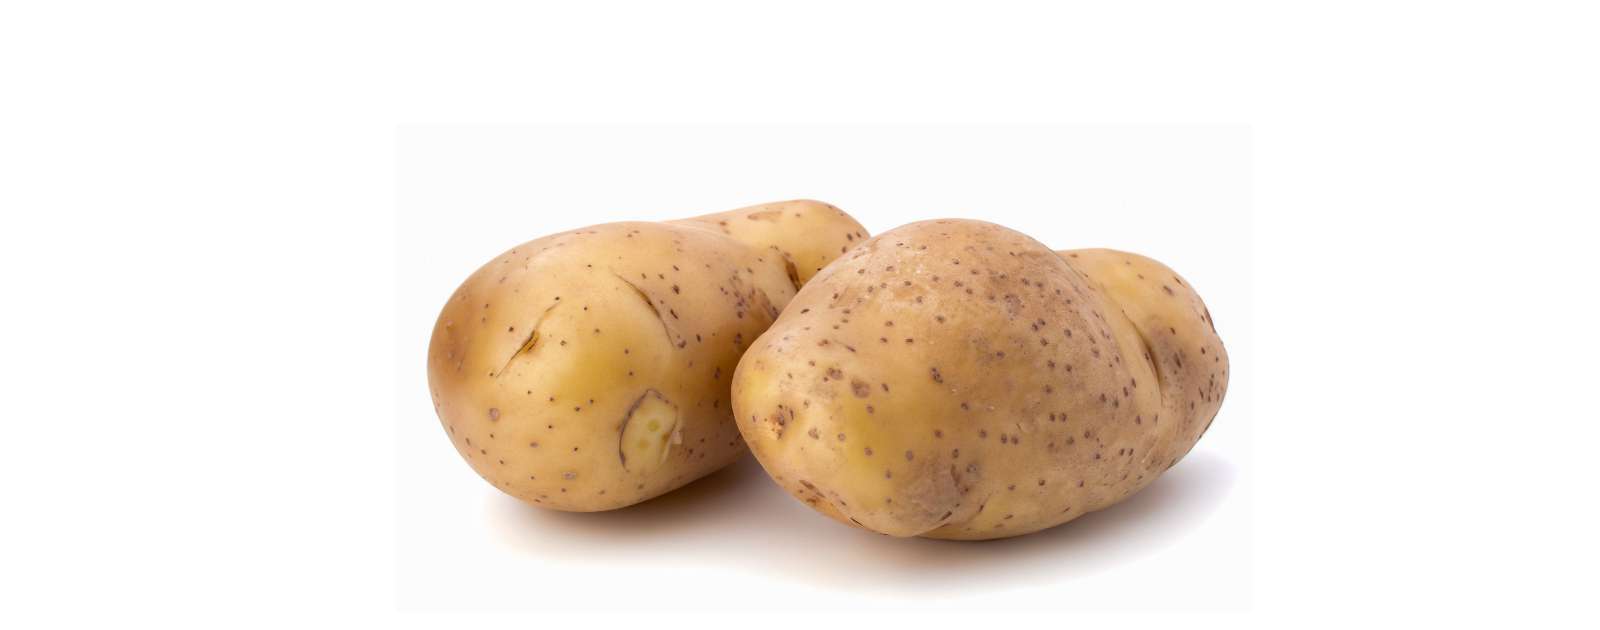 Potatoes With Brown Spots Inside, Rust, and Odd Patterns: What's Safe and What's Not?